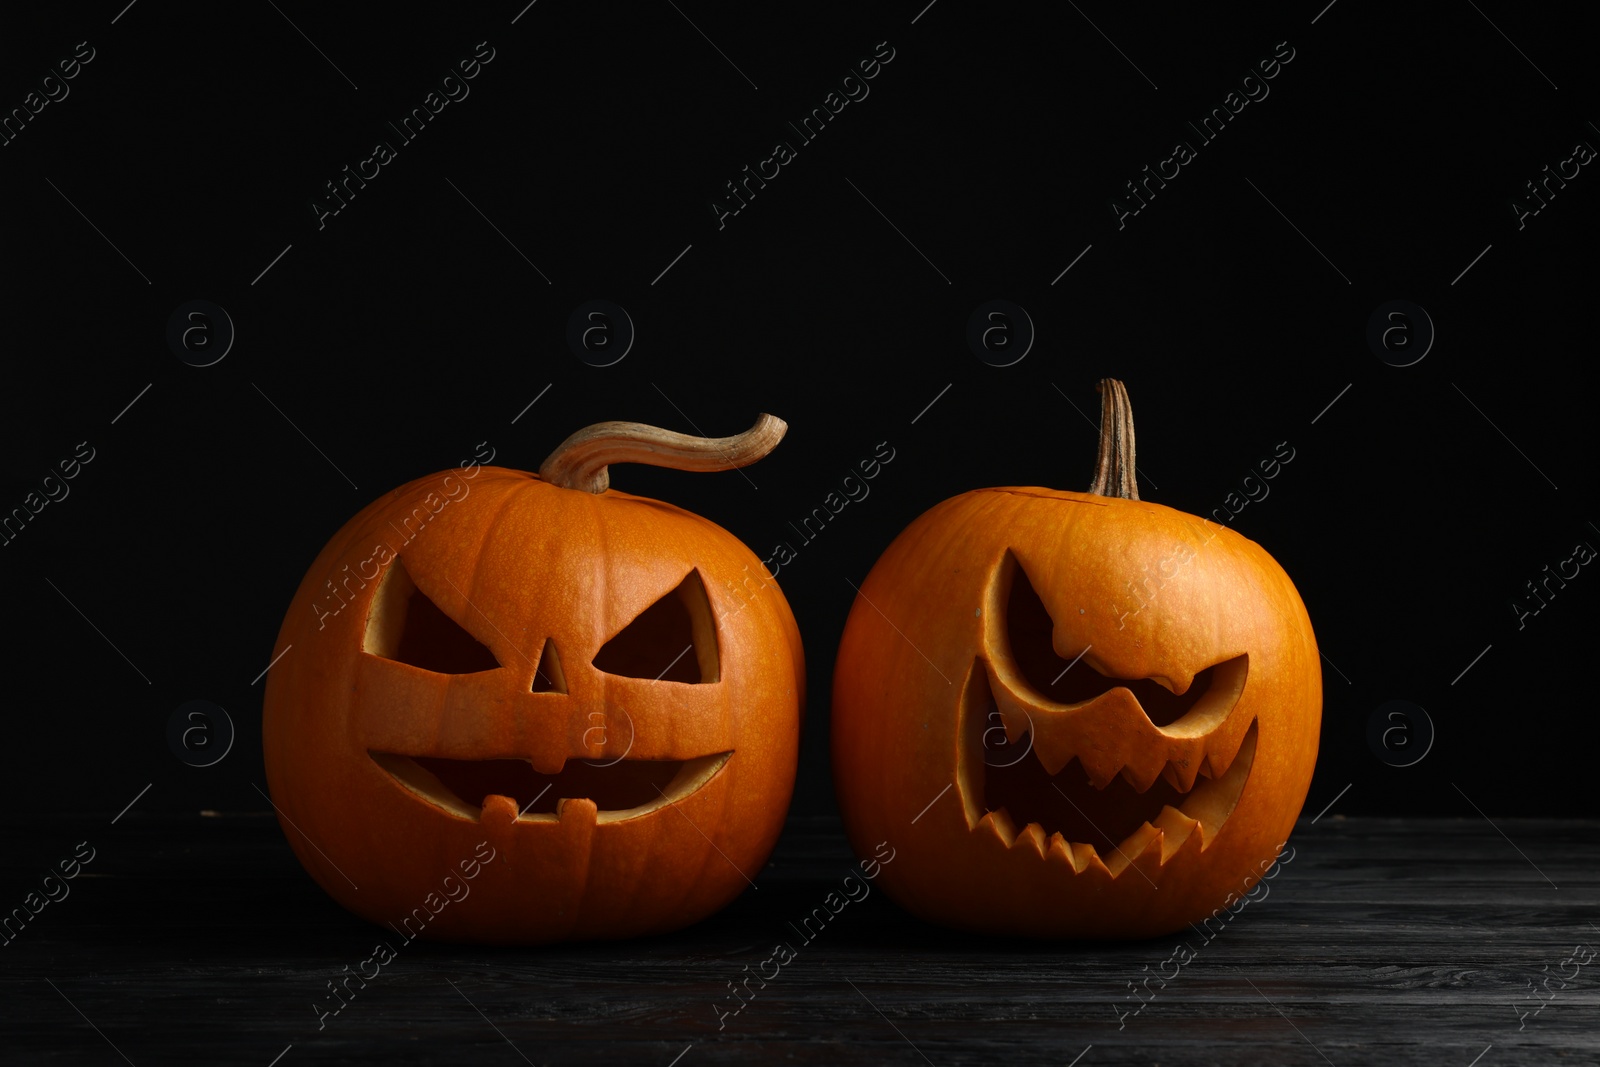 Photo of Scary jack o'lanterns made of pumpkins on wooden table against black background. Halloween traditional decor